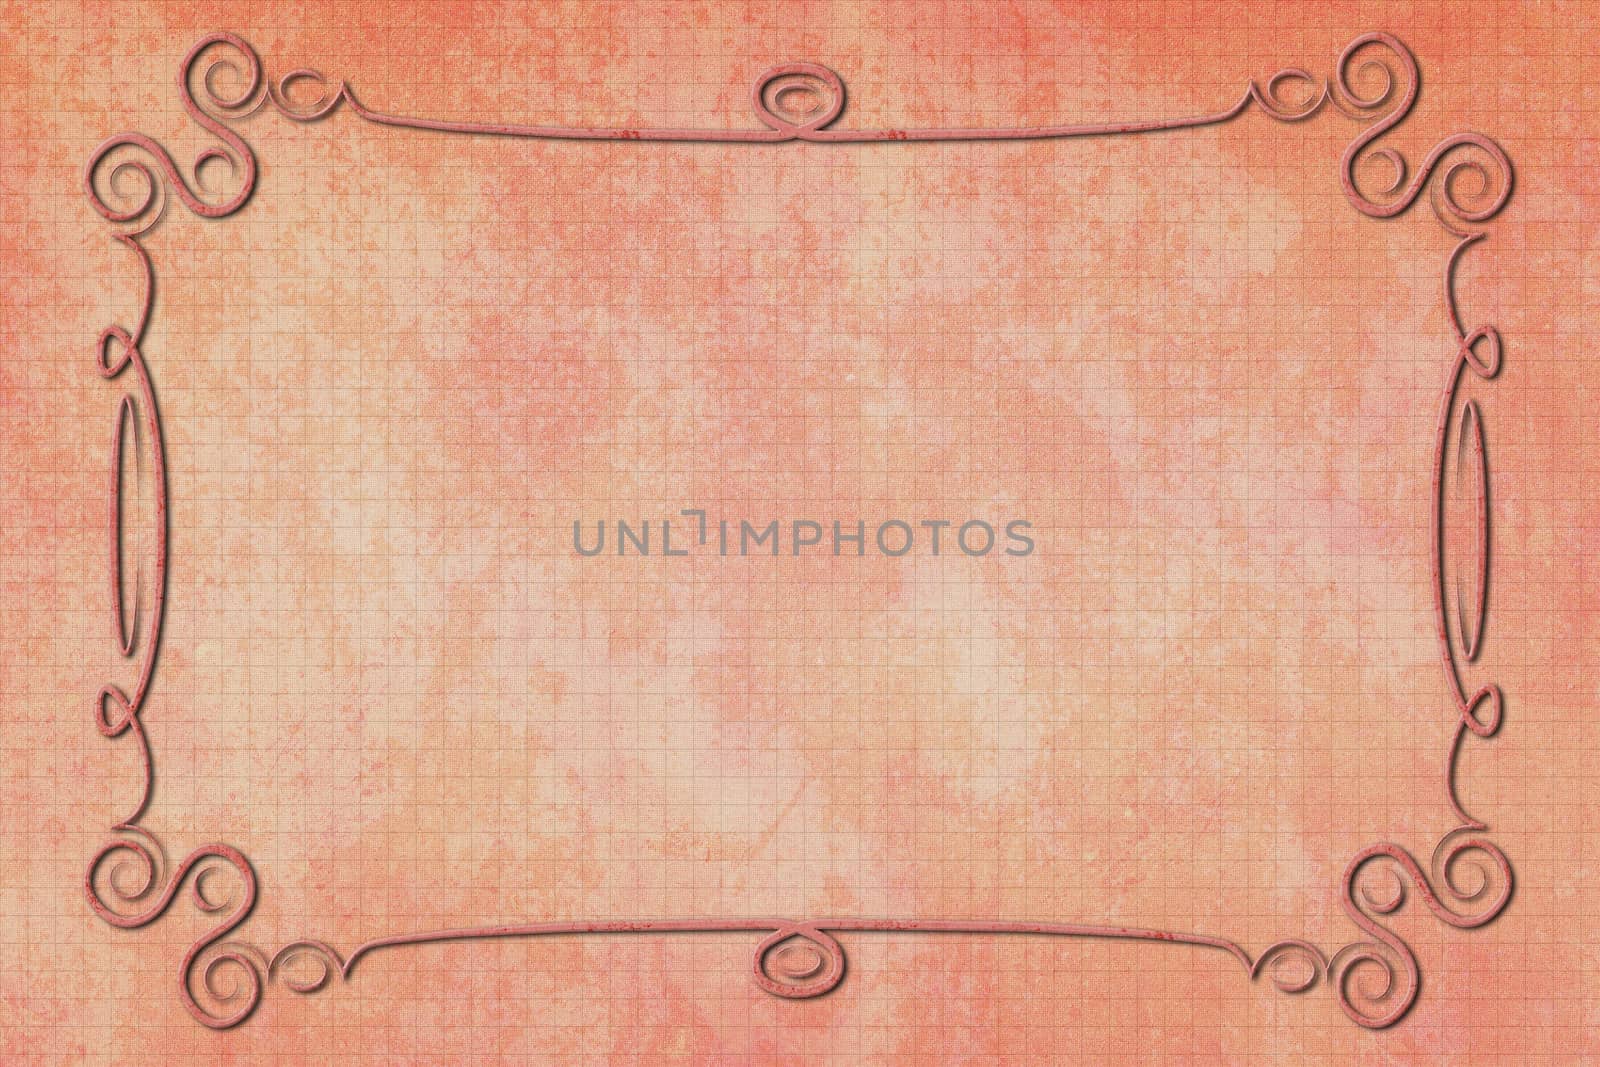 An antique decorative frame with a background with texture. Pink, orange and brown colors